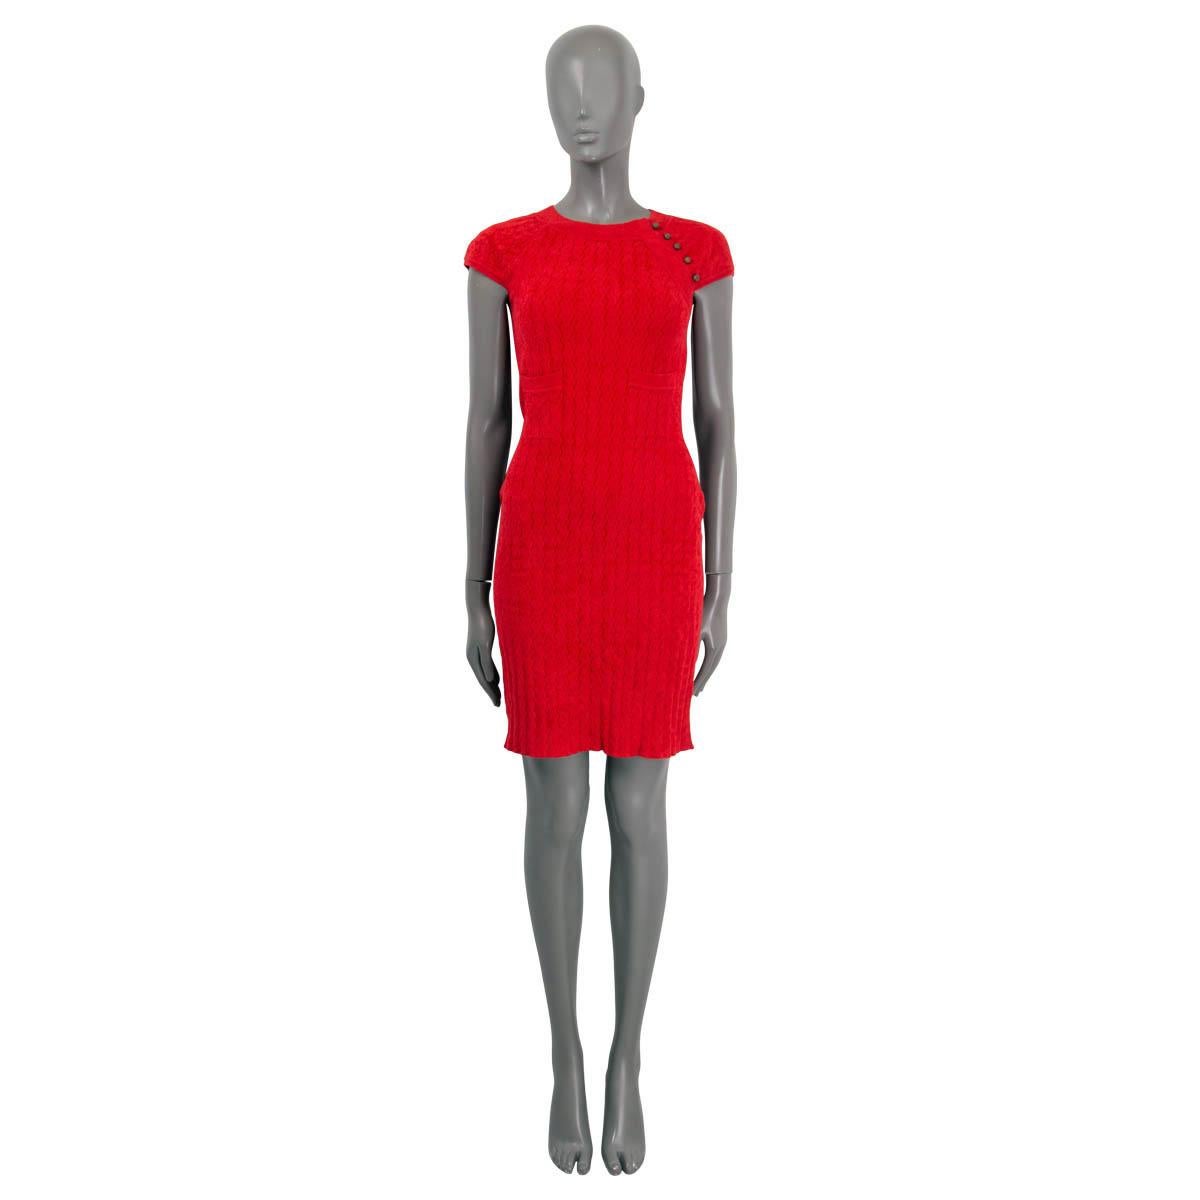 100% authentic Chanel cap sleeve rib knit dress in red viscose (63%) and polyamide (27%). Opens with five CC buttons at the neck. Has been worn and is in excellent condition.

2010 Paris-Shanghai Metiers d'Art

Measurements
Model	Chanel10A
Tag